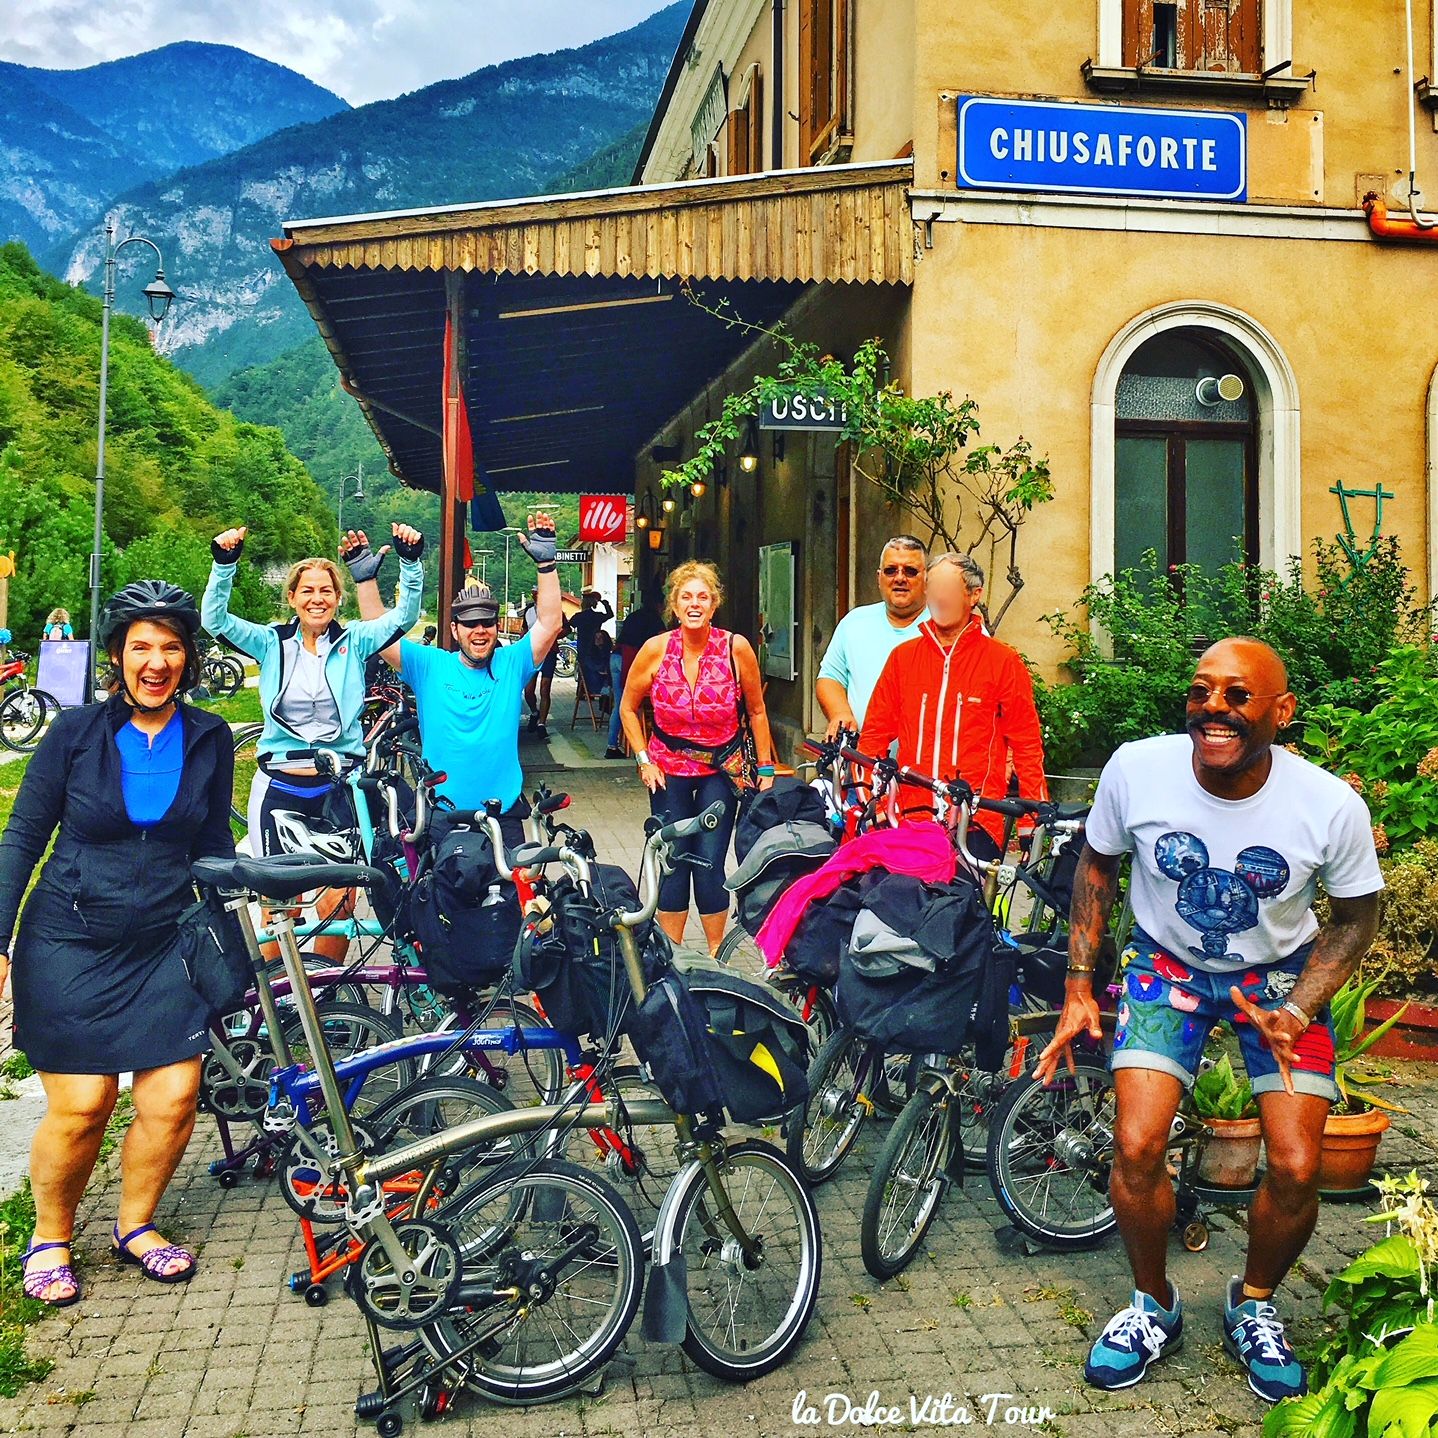 One of our Brompton folding bike guided tour groups in Italy with their bicycles.